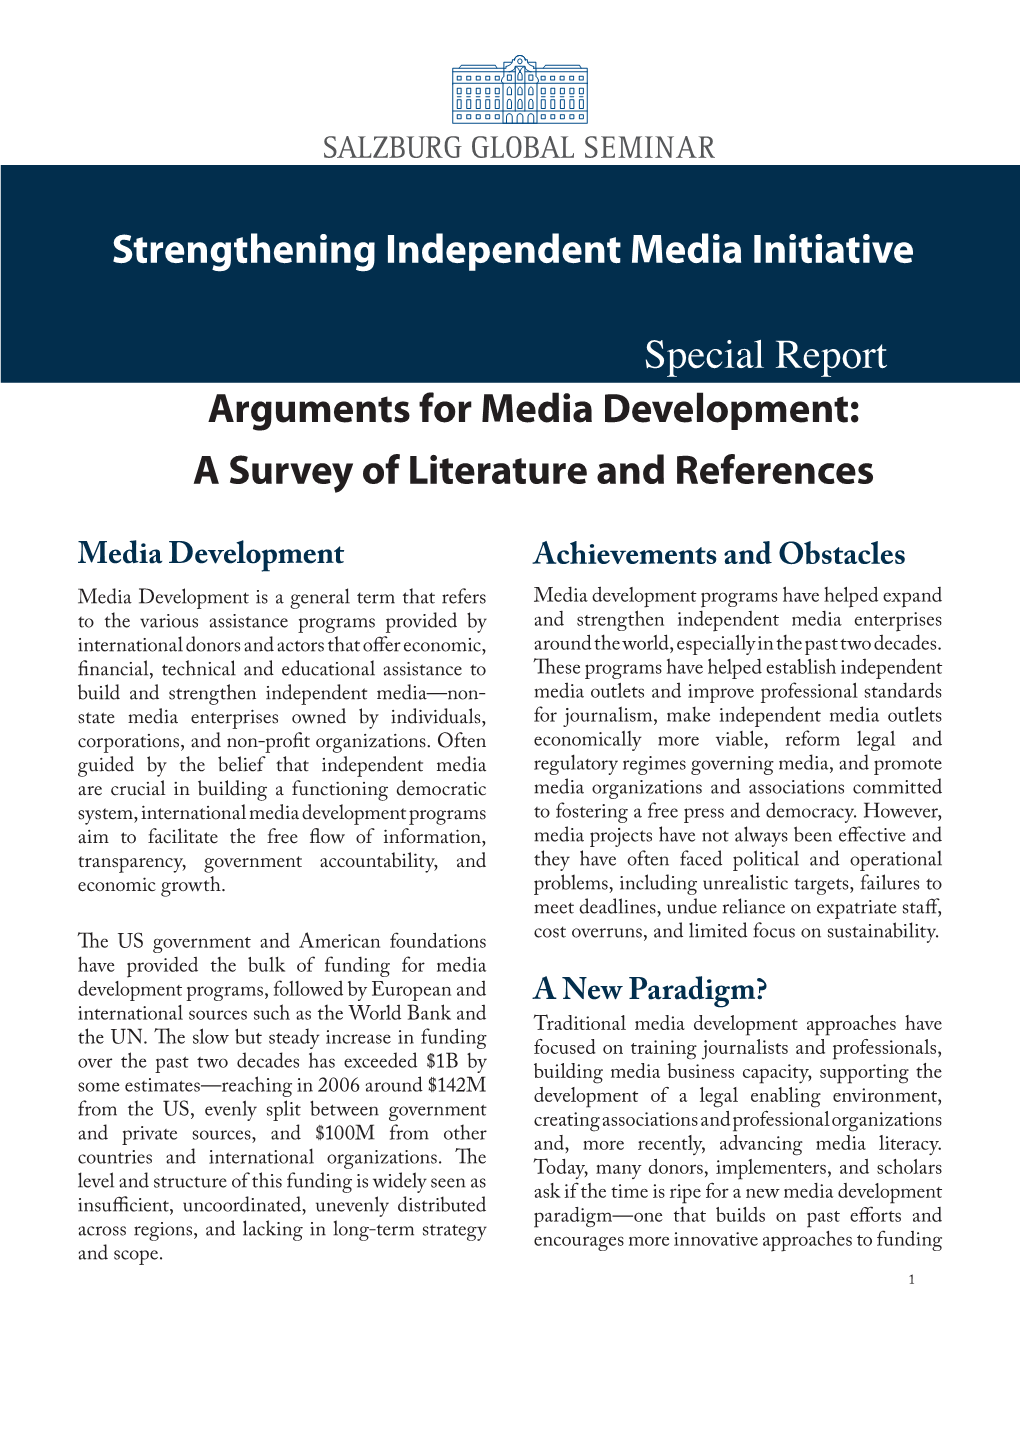 Strengthening Independent Media Initiative Special Report Arguments